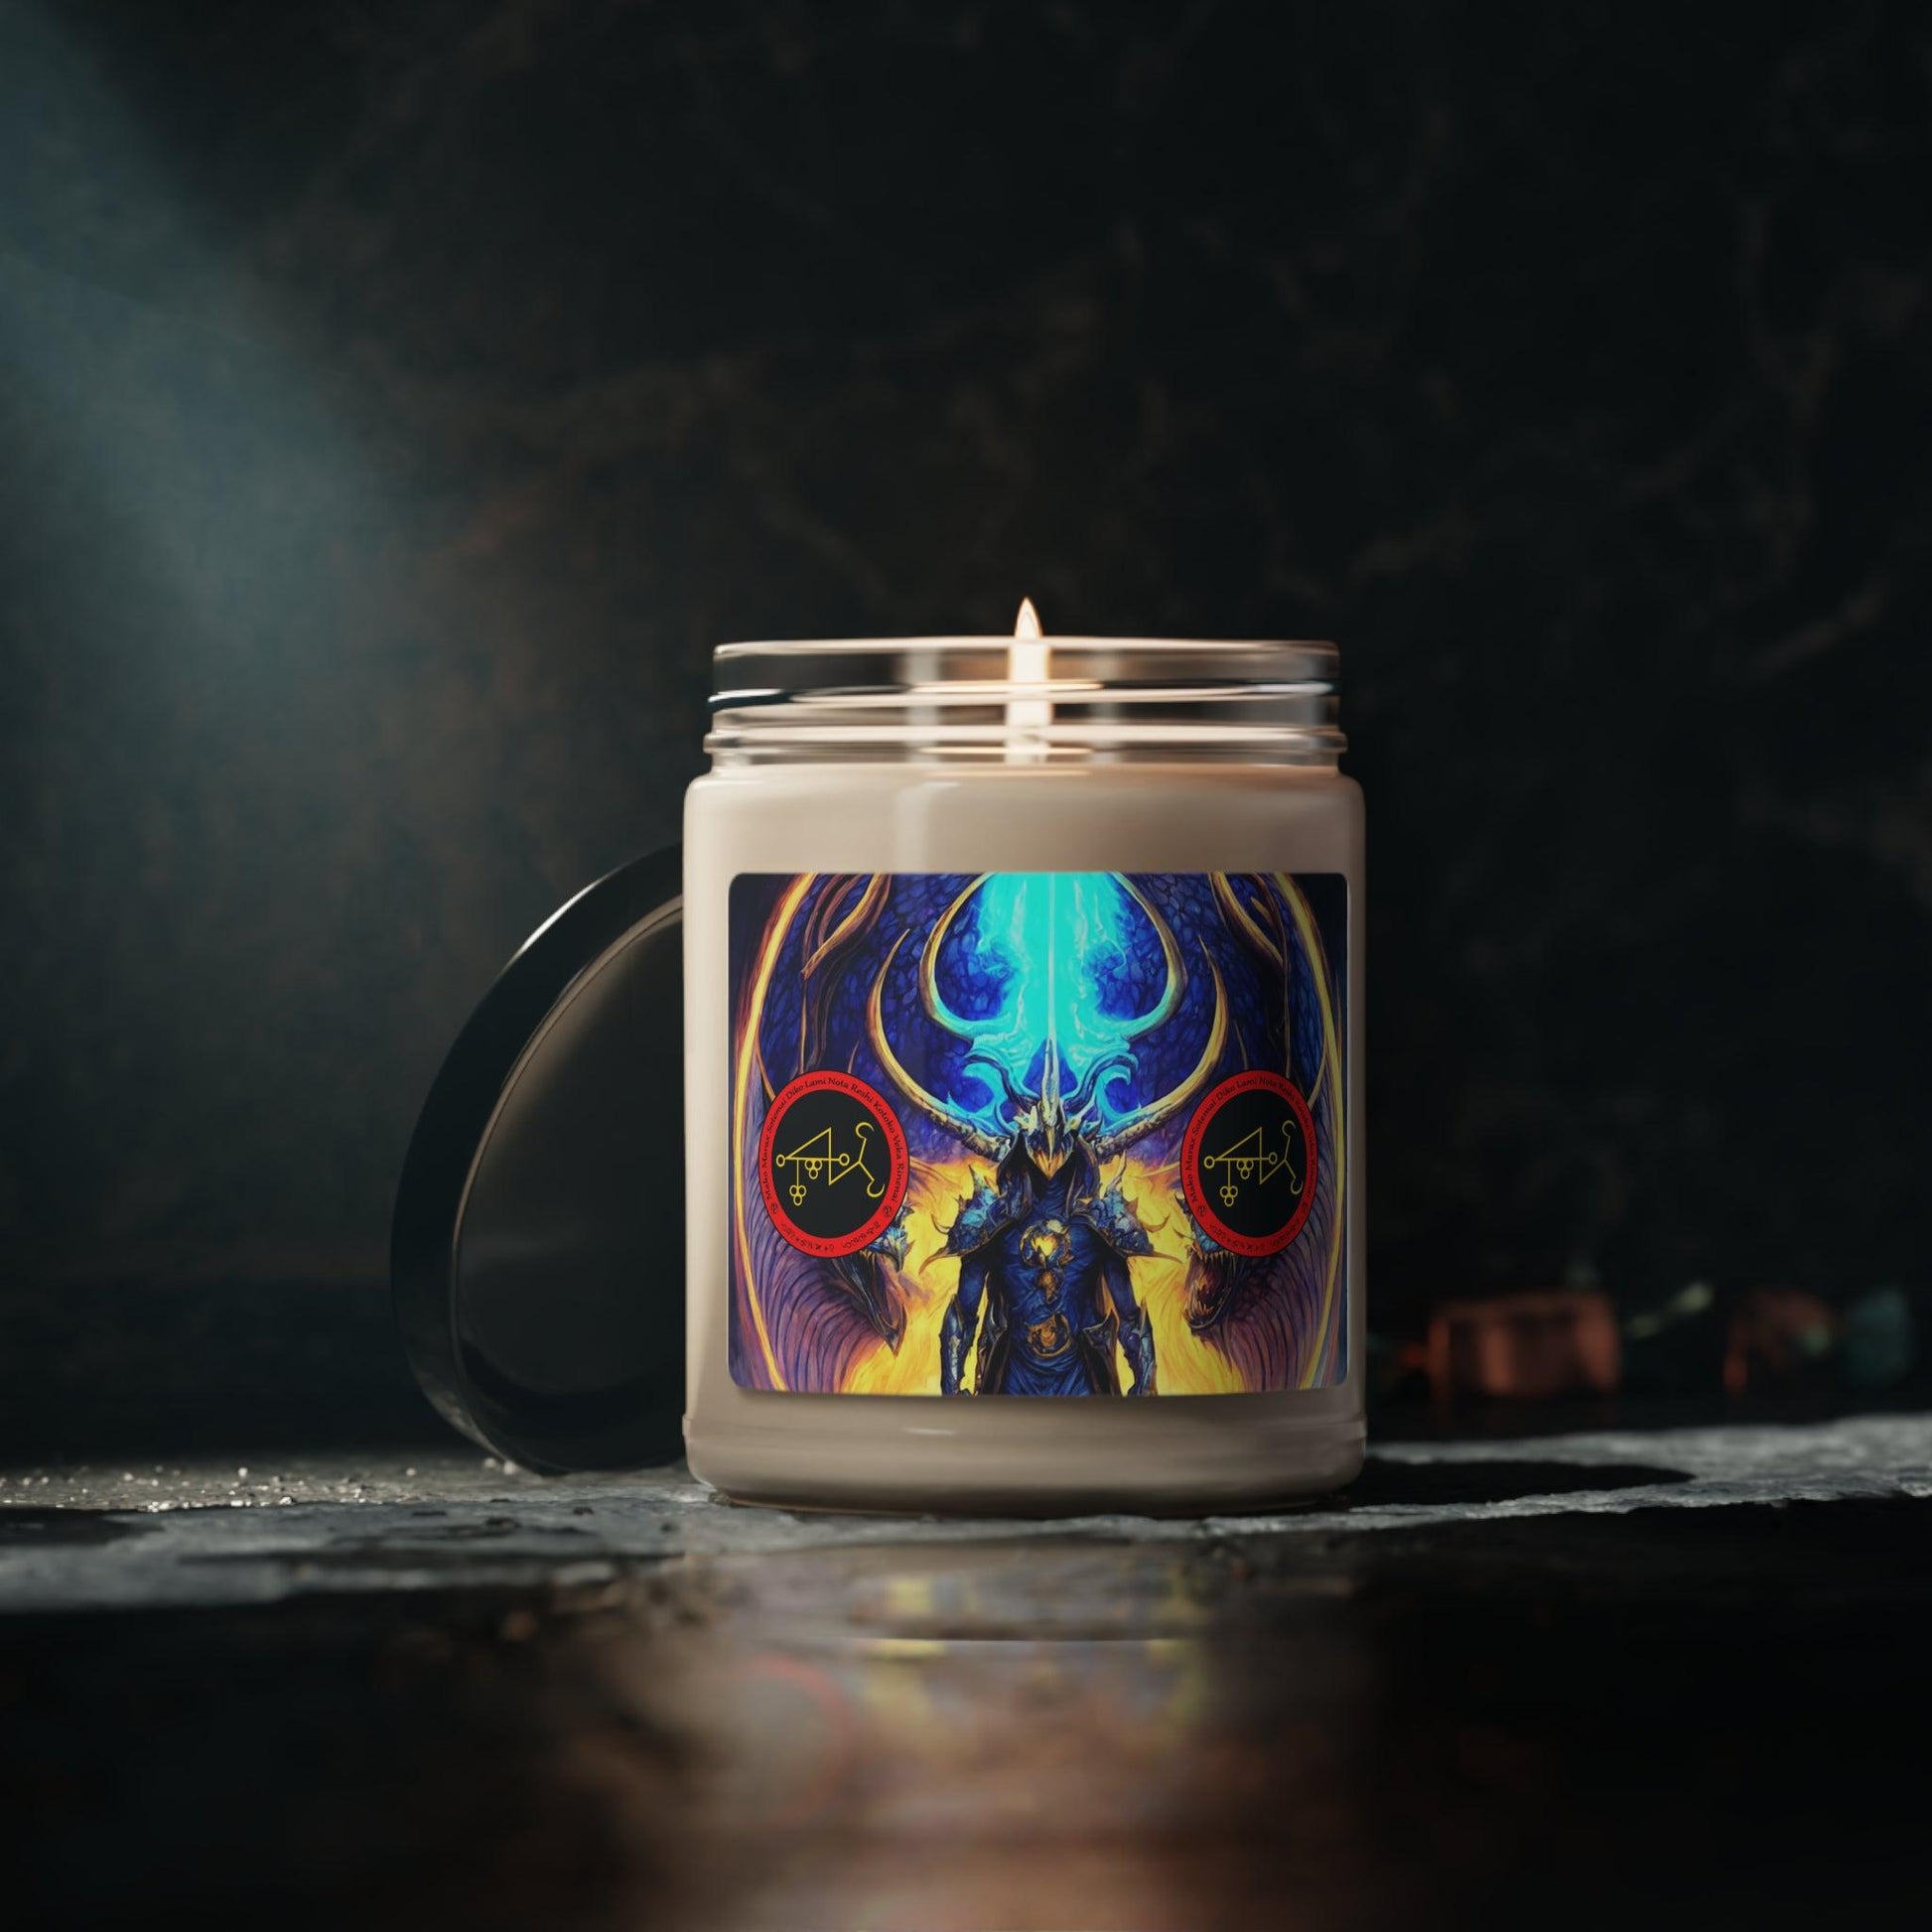 Demon-Marax-Altar-Scented-Soy-Candle-To-Learn-Magic-and-witchcraft-in-offerings-rituals-initiations-or-praying-and-meditation-10